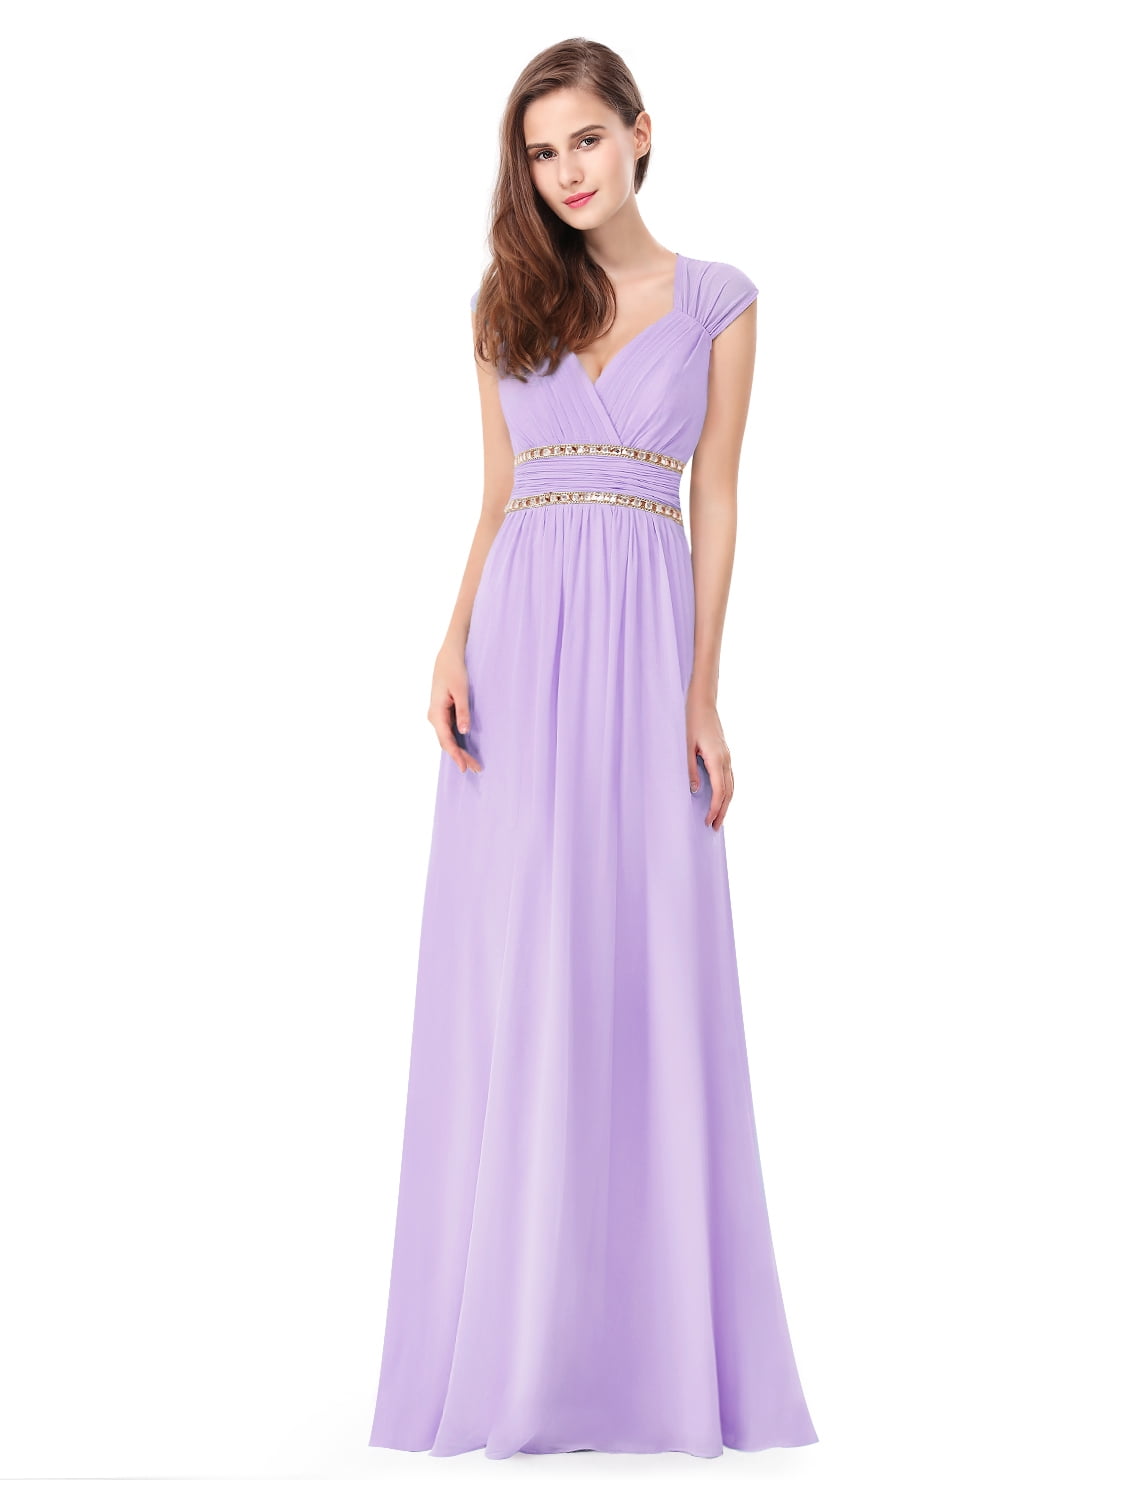 UK Ever Pretty Long Bridesmaid Evening Formal Homecoming Dress Prom Gowns 08697 